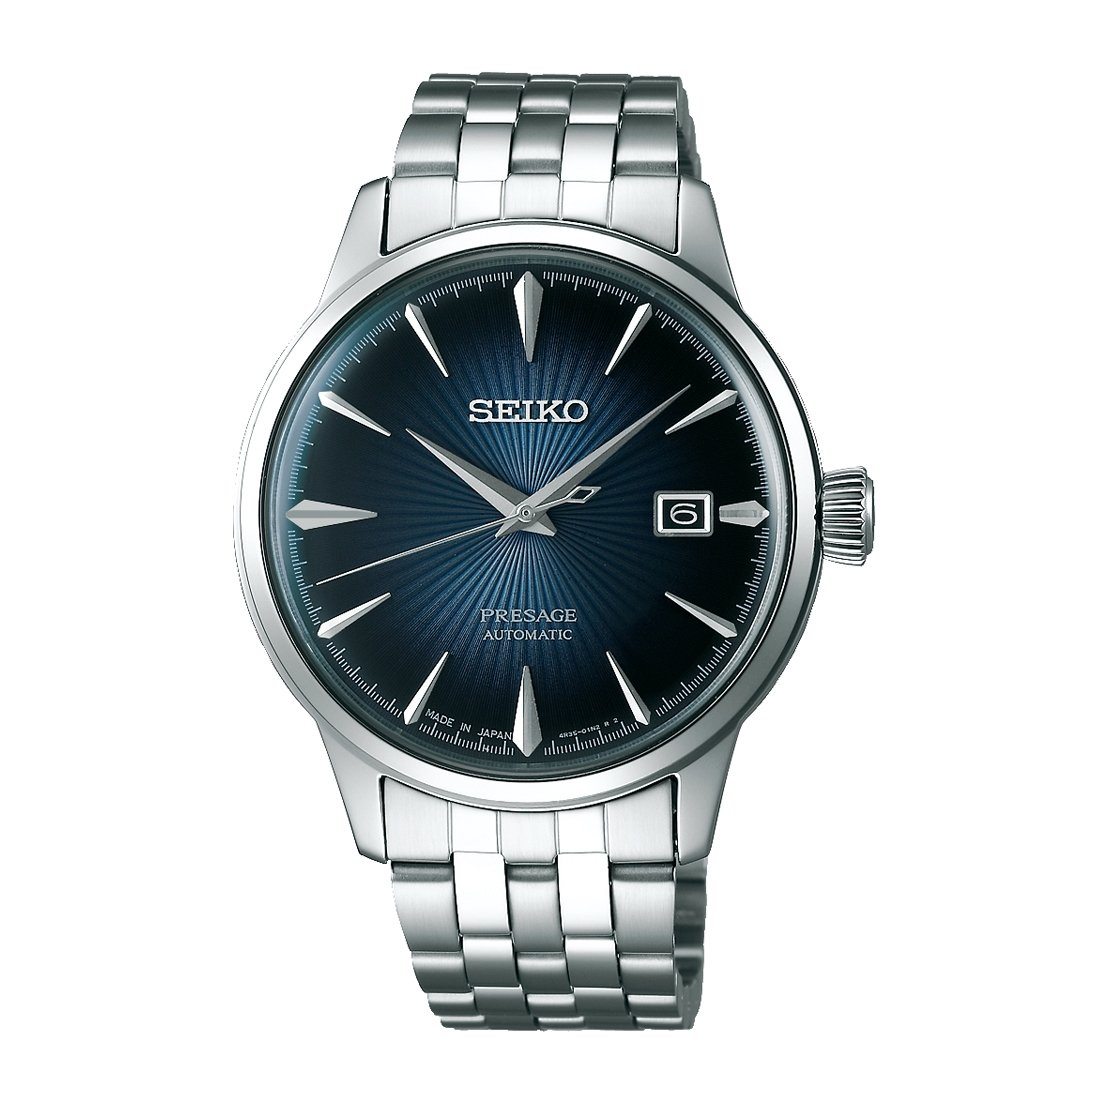 Seiko Presage Automatic Blue Face Mens Watch Model SRPB41J – Watches Galore